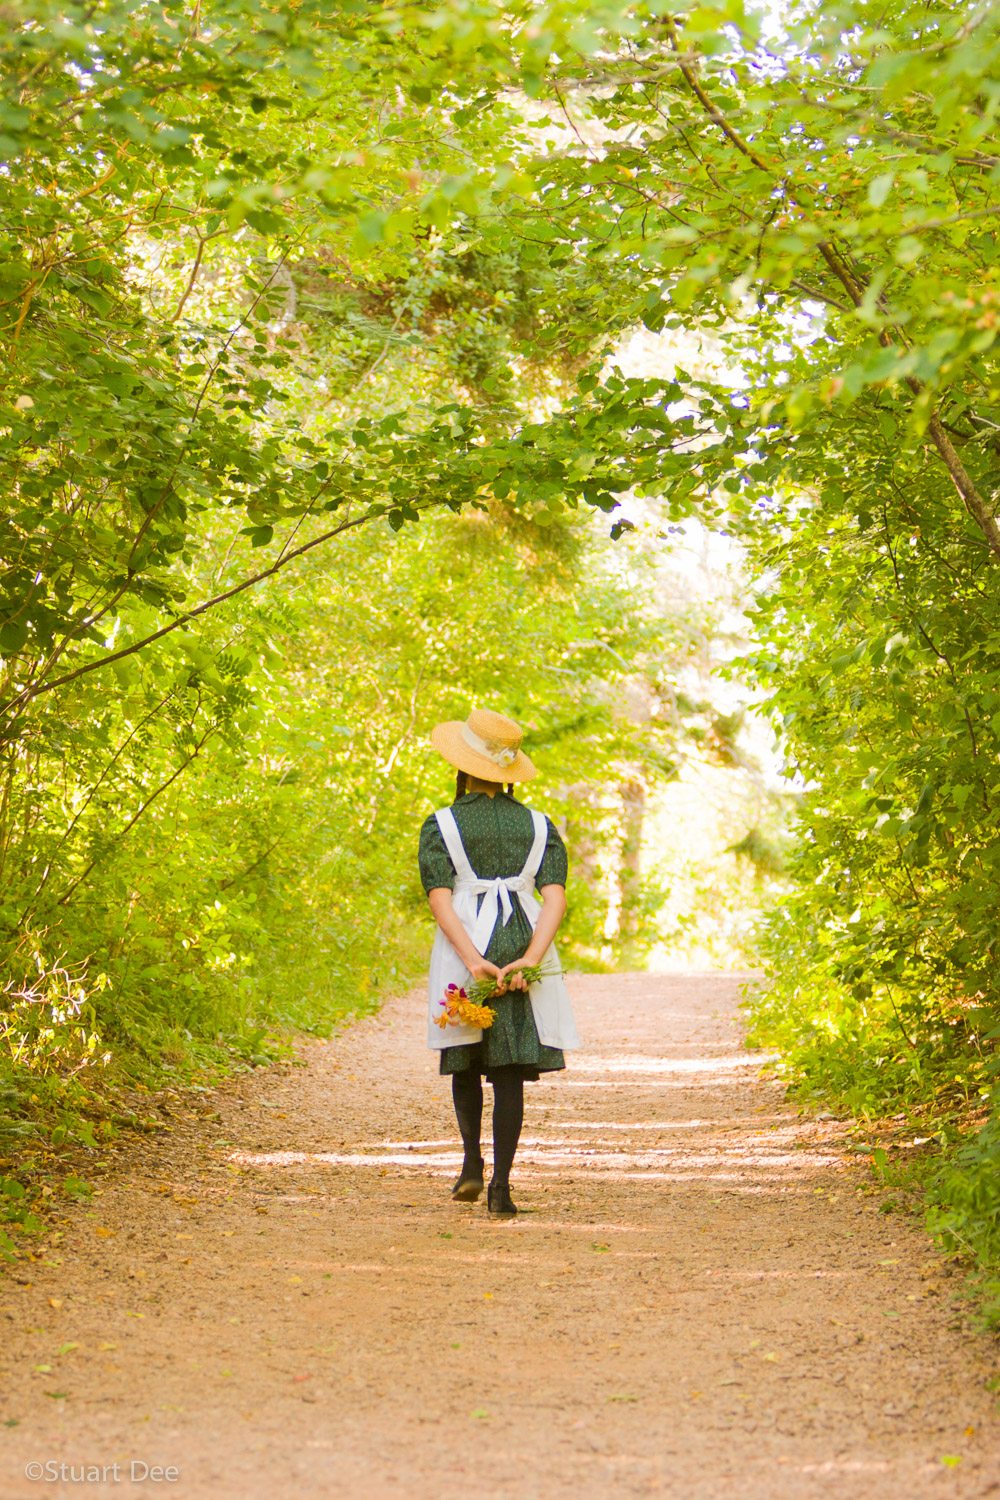  Young girl with hat and braids, "Anne of Green Gables", walking through Lovers' Lane, by the Green Gables home, Cavendish, Prince Edward Island, Canada

Anne of Green Gables is a book written by Canadian author Lucy Maud Montgomery; it was first pub